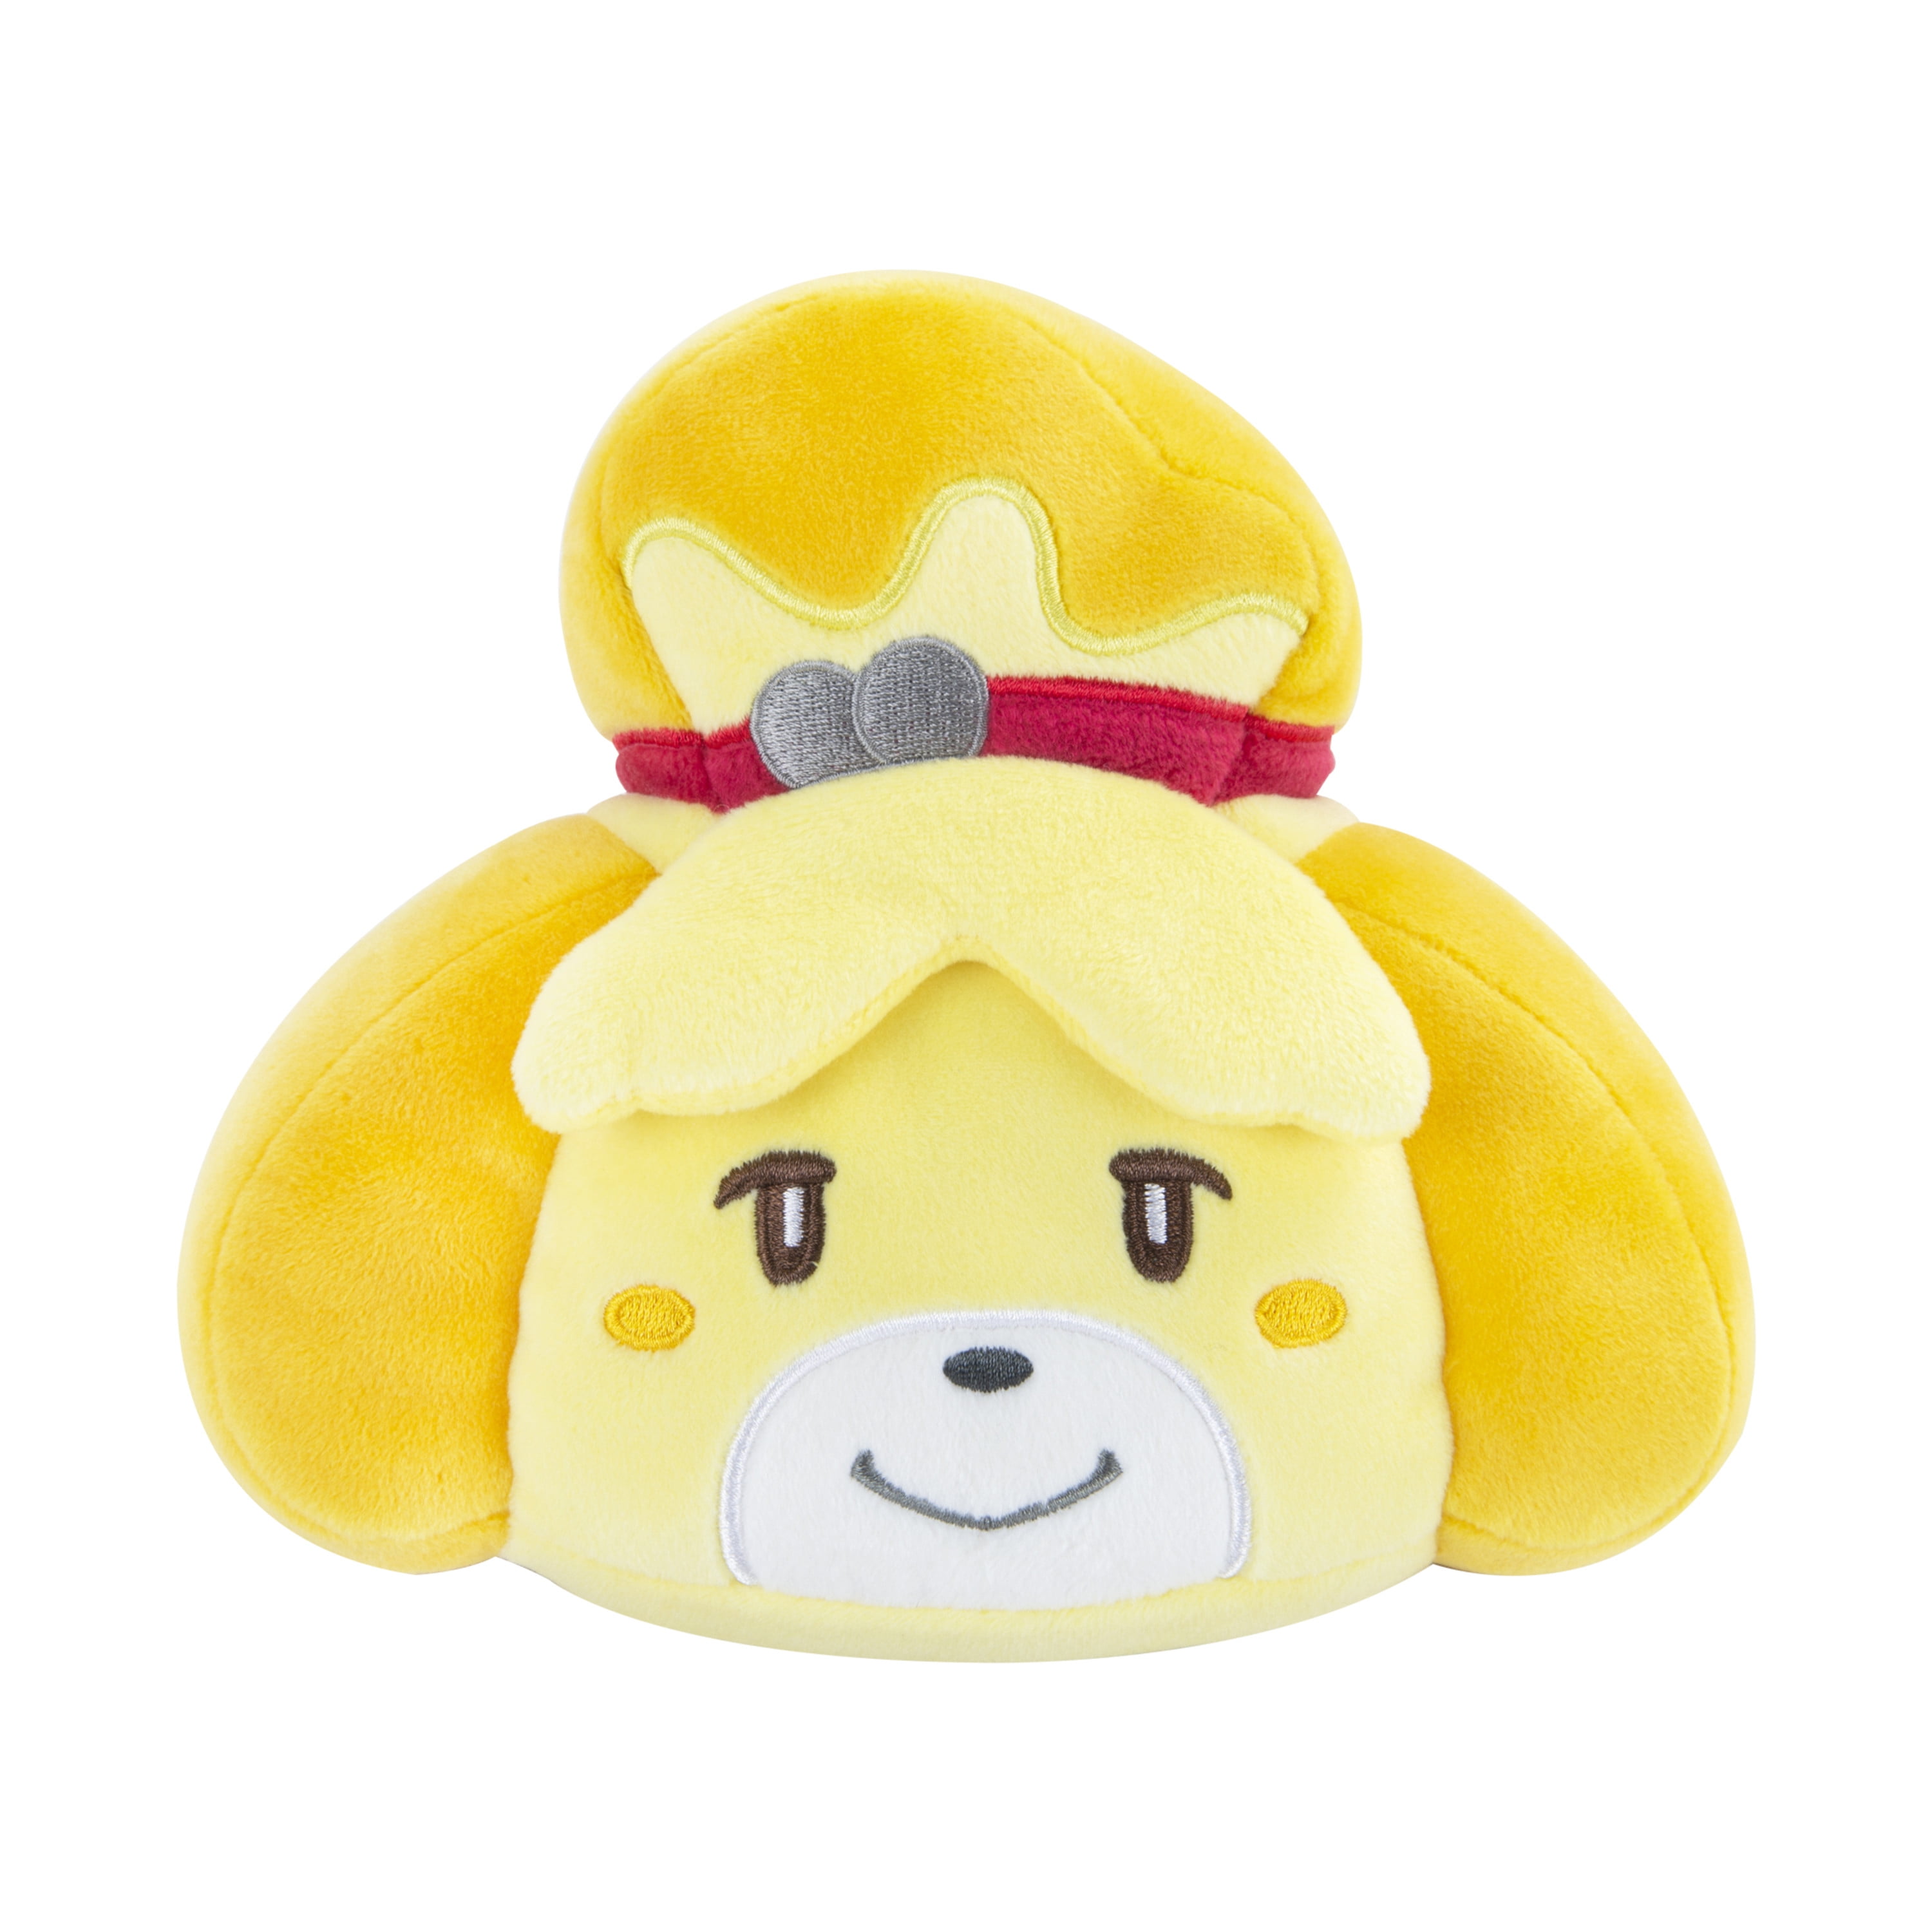 Plush Toy Sanei Boeki US Seller Details about   Animal Crossing New Horizons Isabelle S 